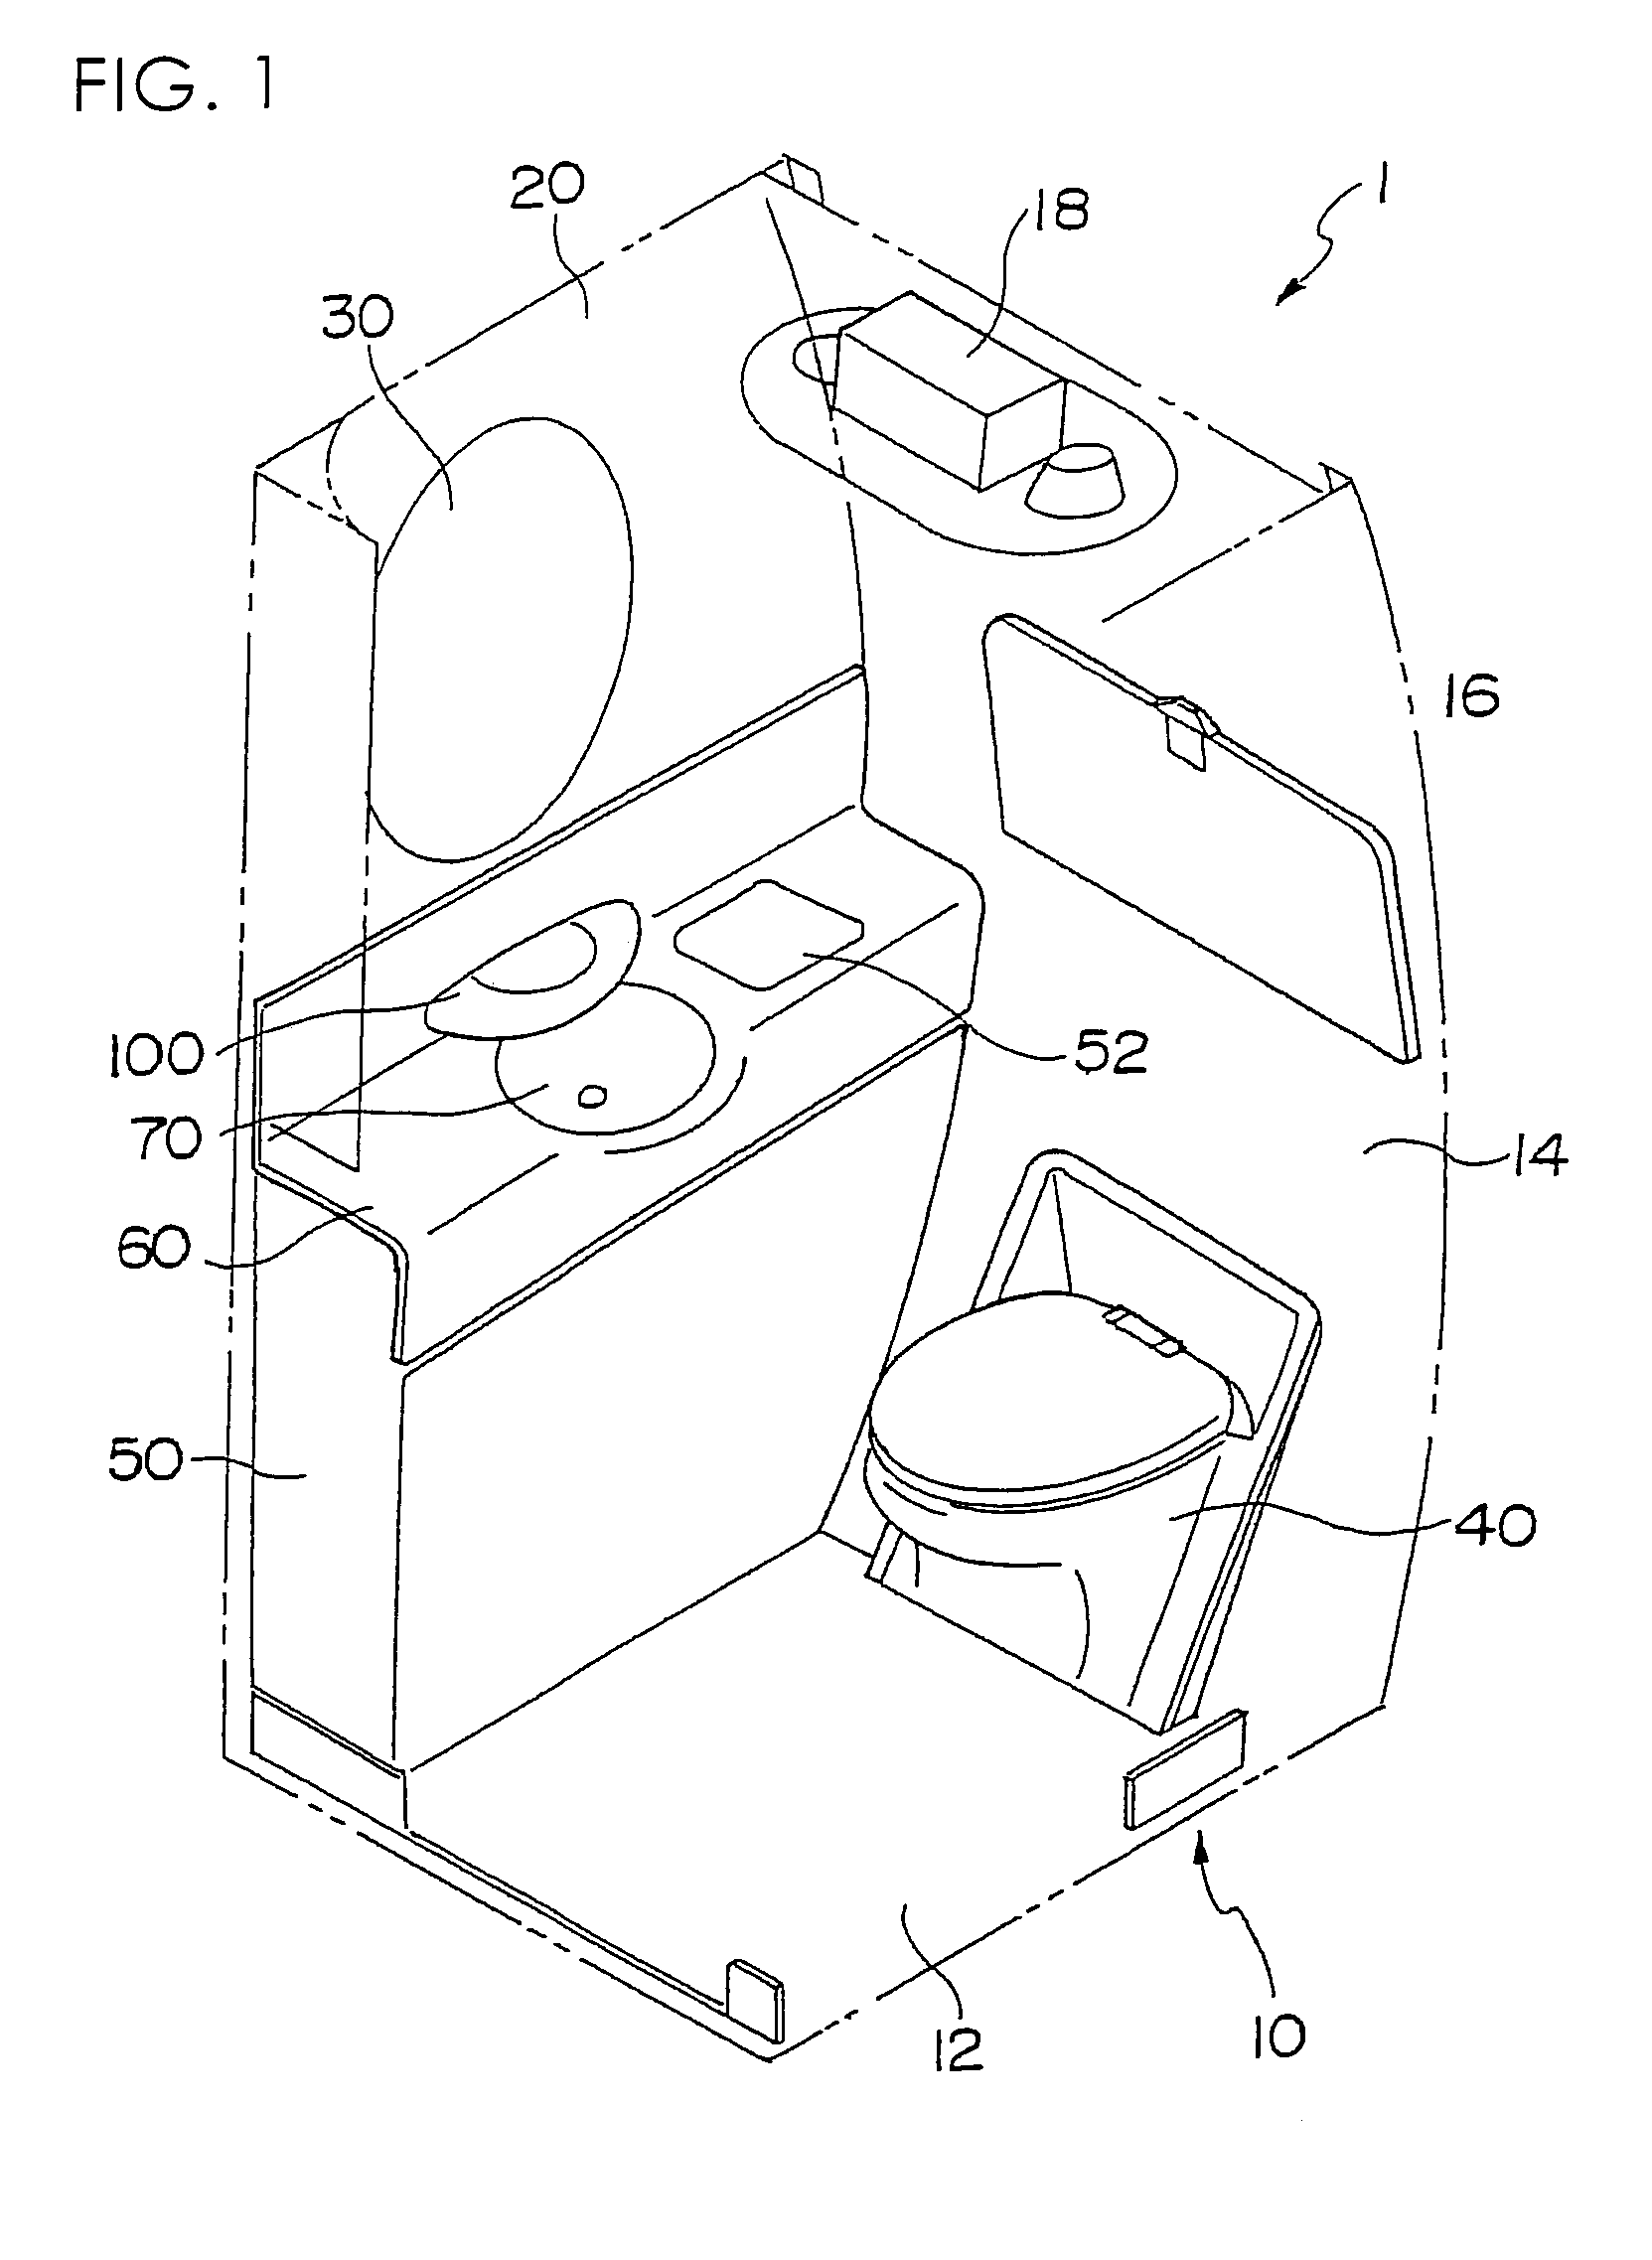 Automatic faucet for lavatory unit of aircraft